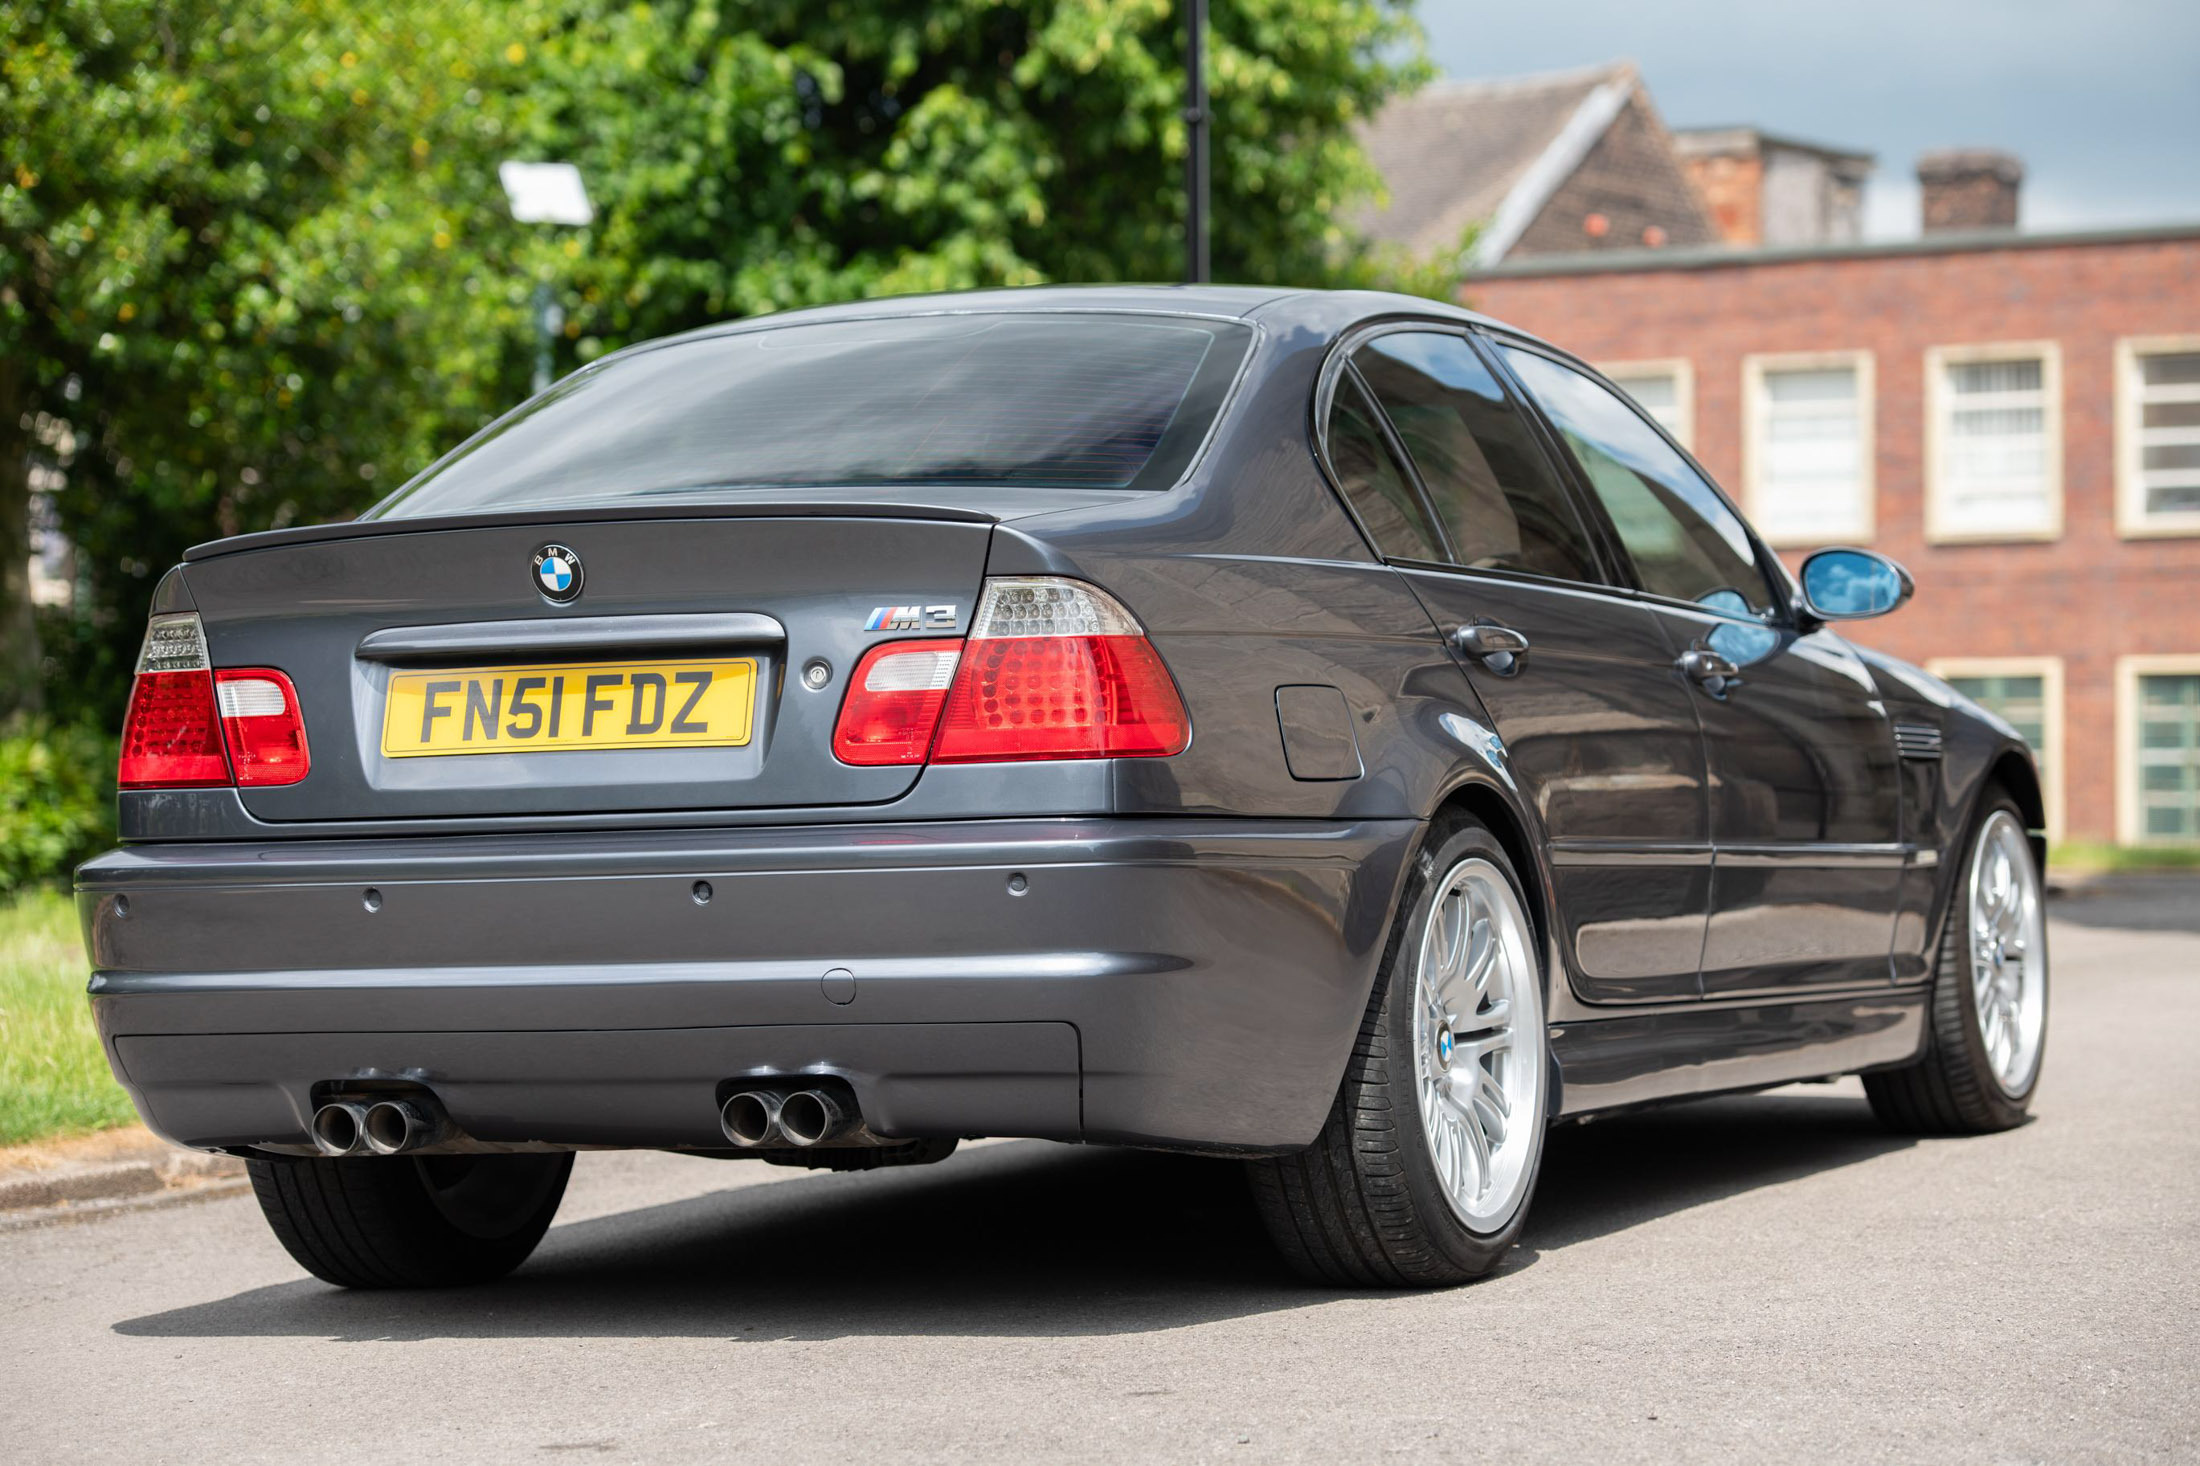 This E46 M3 Sedan Conversion Reminds Us Of The Other M3 BMW